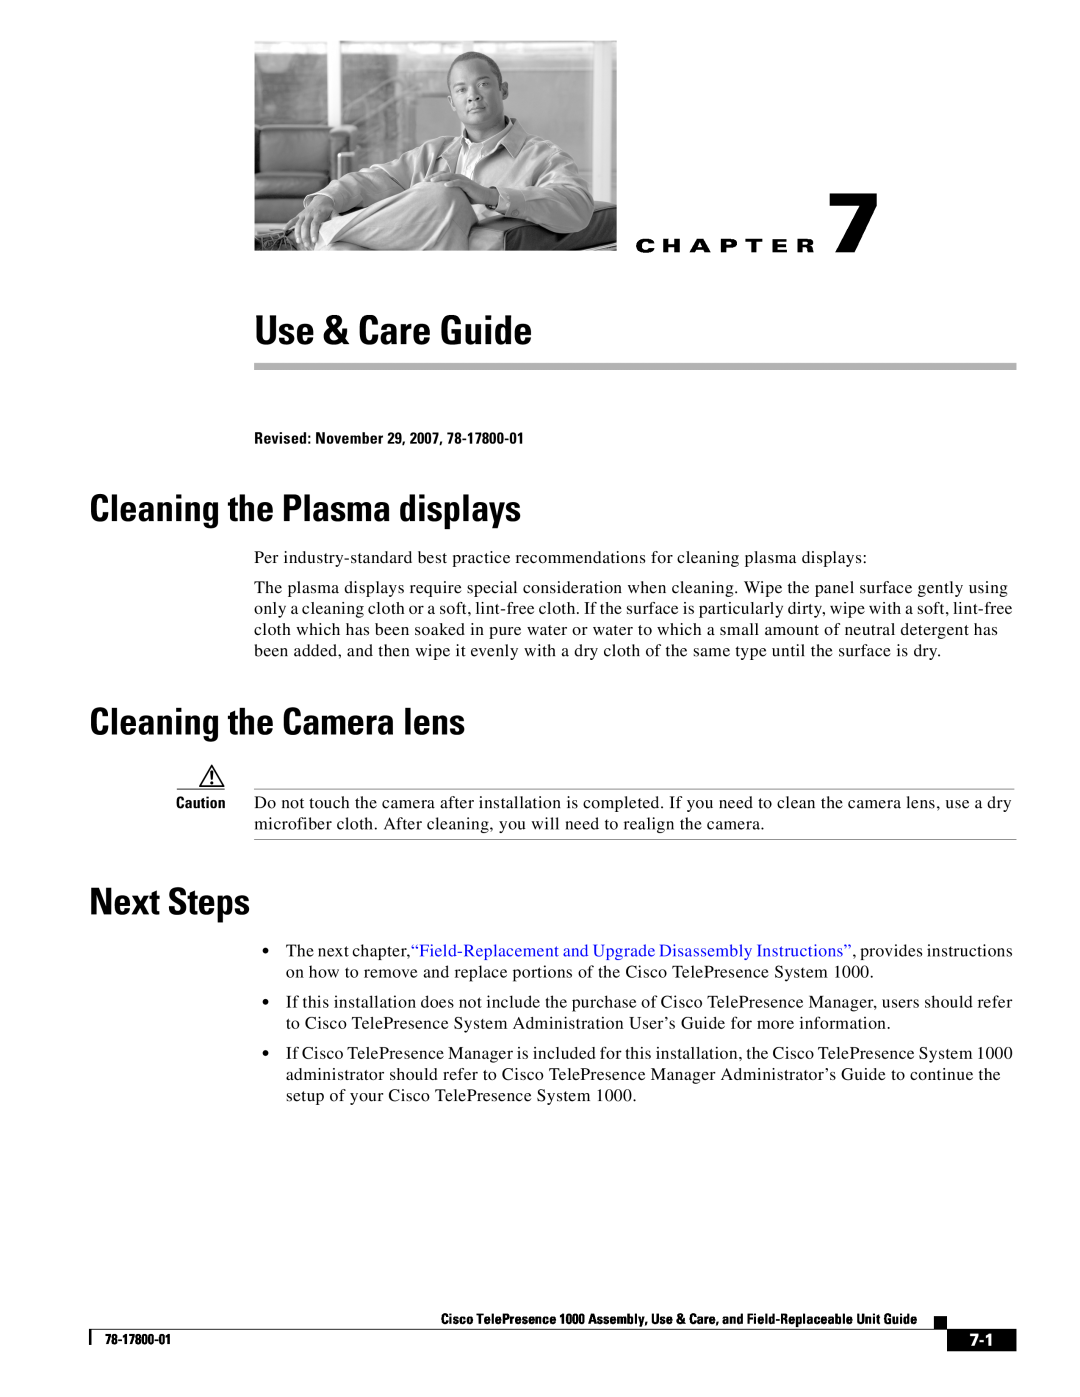 Cisco Systems 1000 manual Use & Care Guide, Cleaning the Plasma displays, Cleaning the Camera lens, Next Steps 